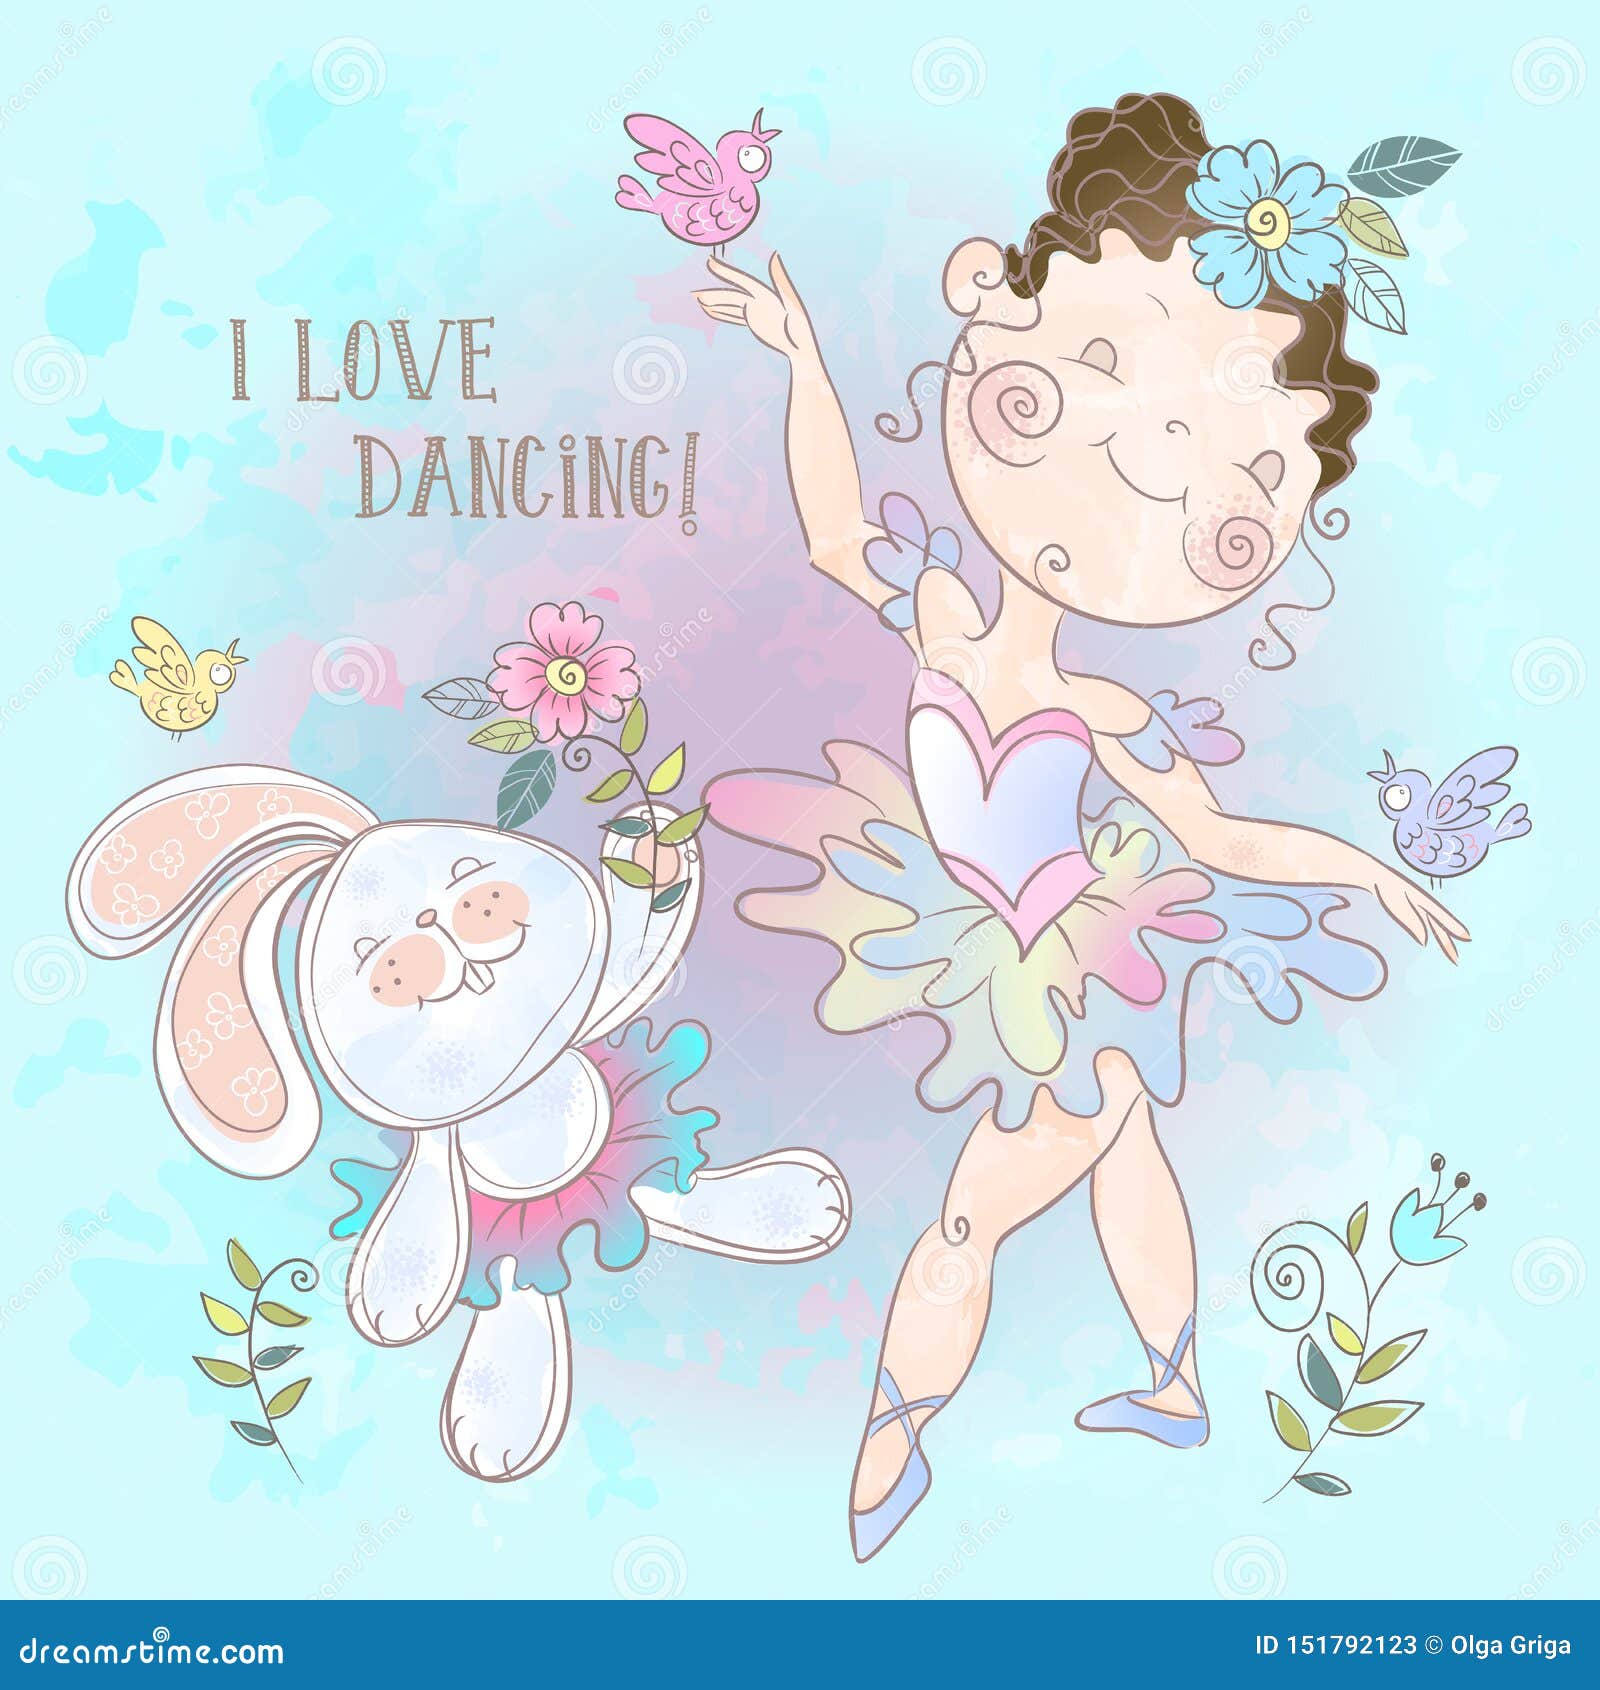 little ballerina dancing with a bunny. 